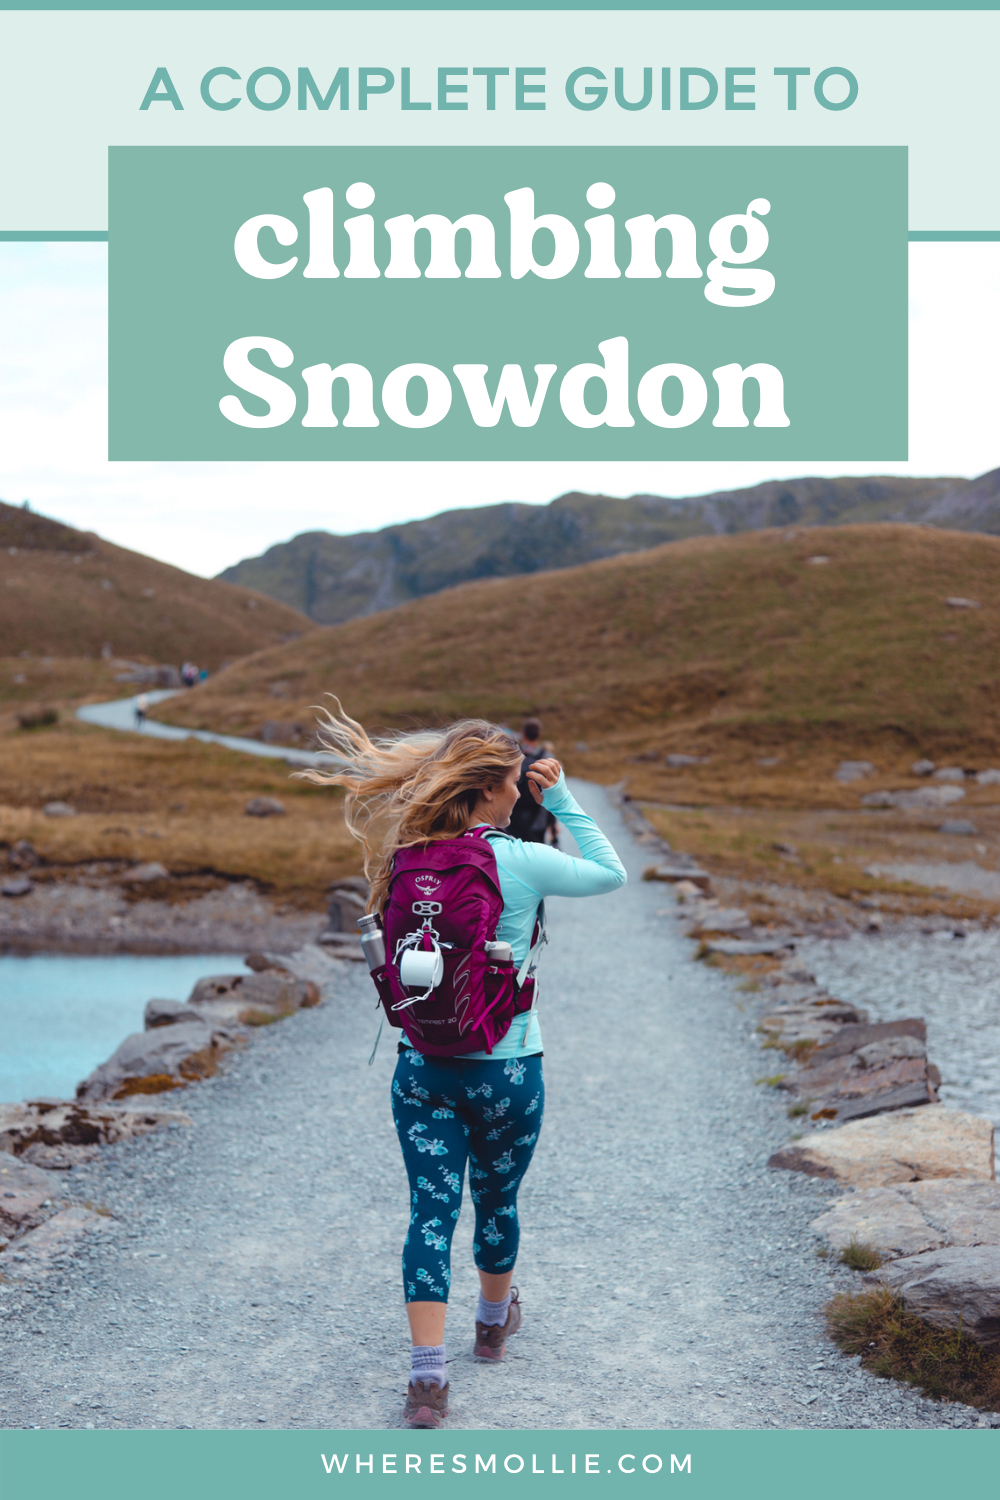 Snowdon: A guide to summiting Wales' highest peak